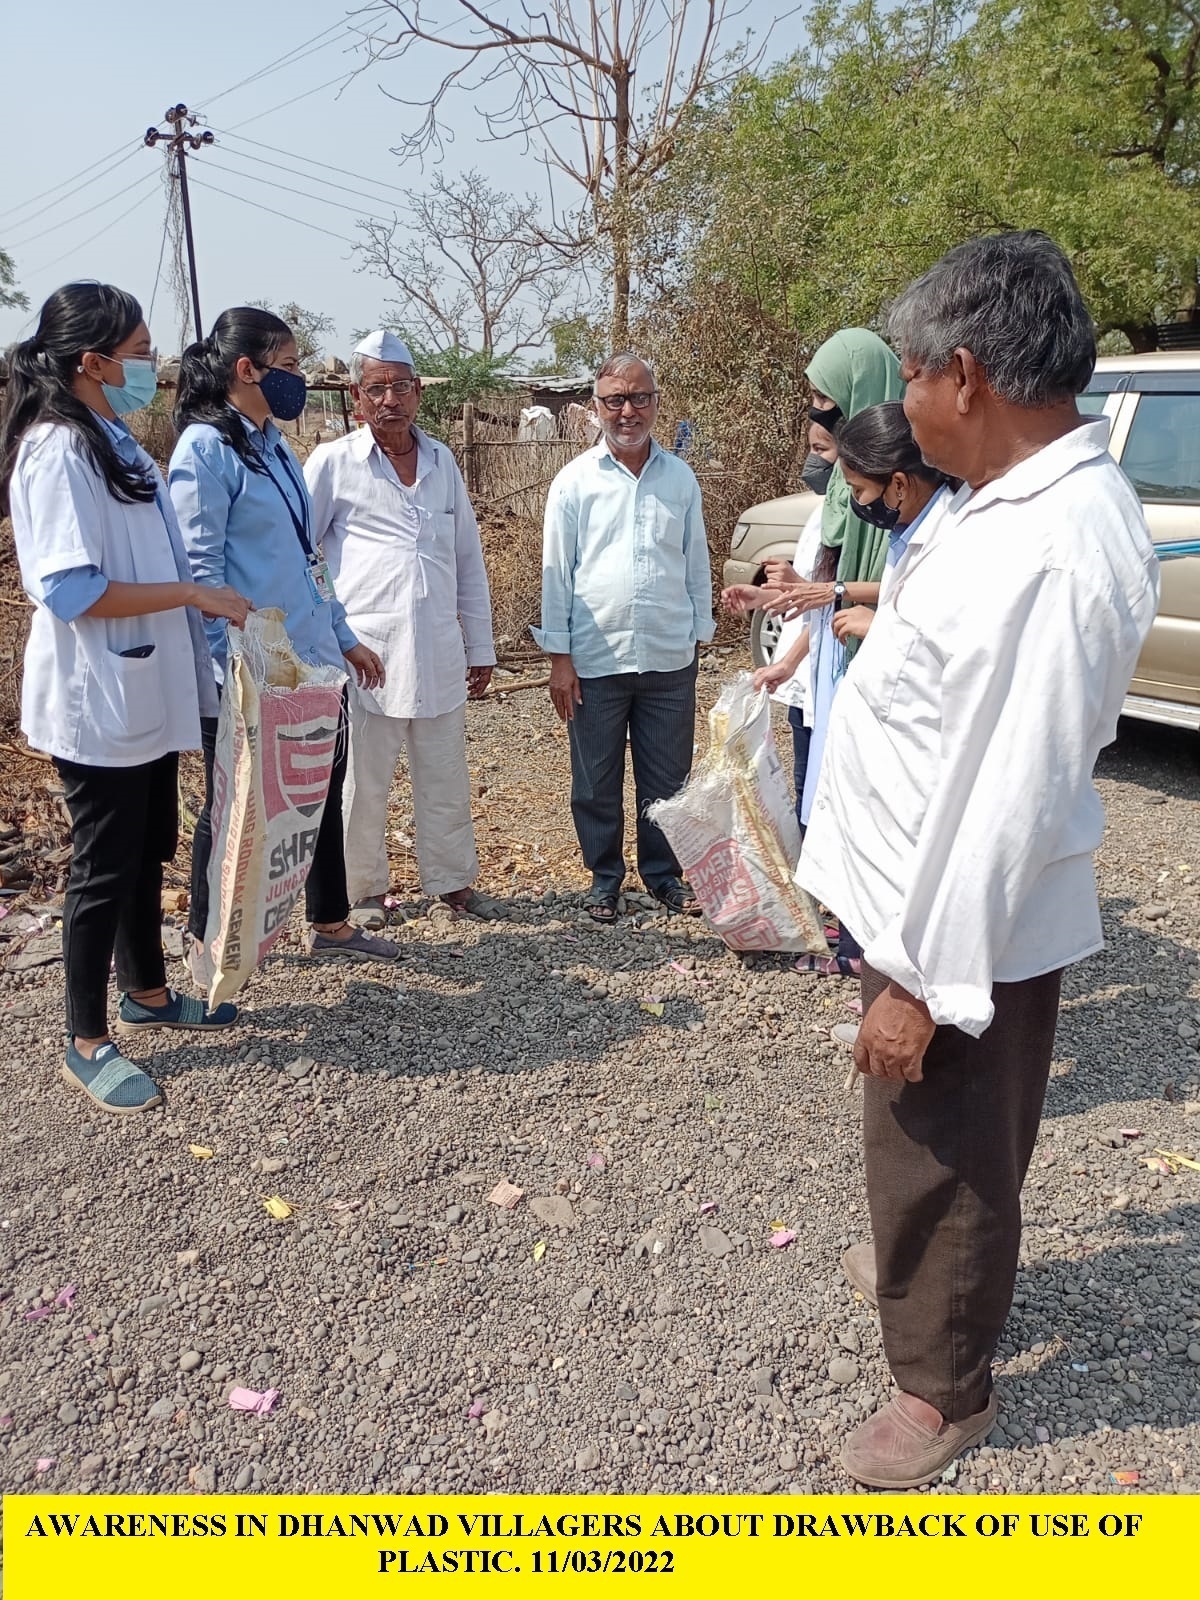 AWARENESS IN DHANWAD VILLAGERS ABOUT DRAWBACK OF USE OF PLASTIC 11.3.2022